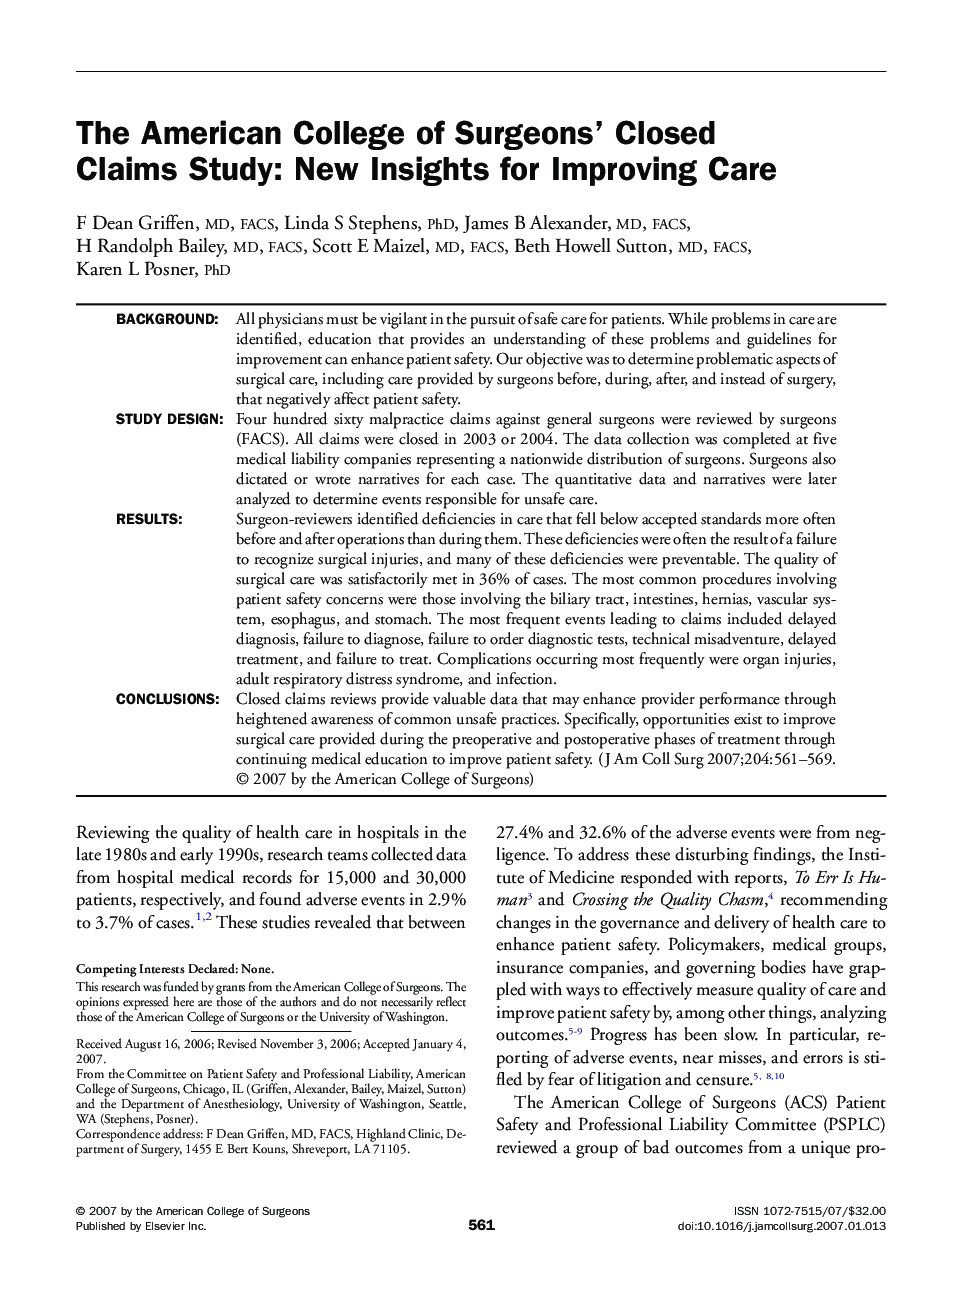 The American College of Surgeons’ Closed Claims Study: New Insights for Improving Care 